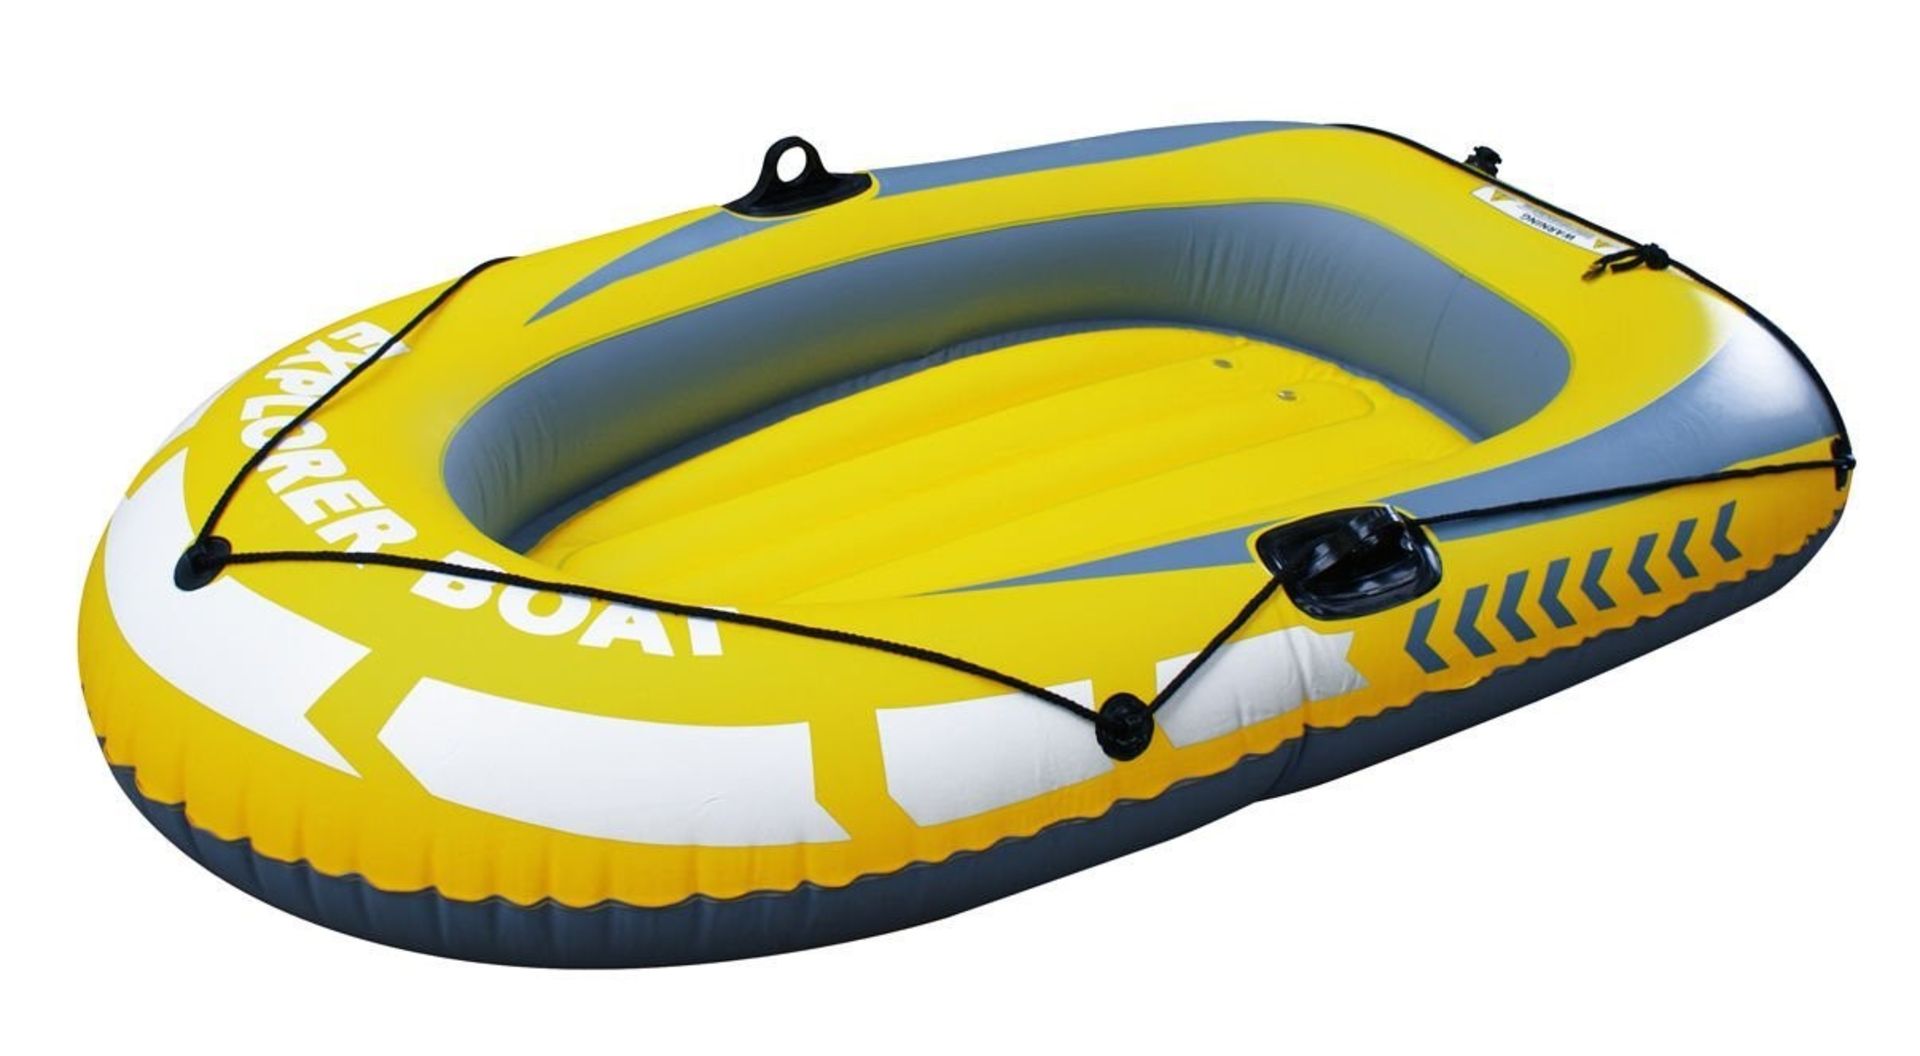 1 x "EXPLORER" 2-Person Inflatable Dingy - Brand New & Boxed - CL155 - Ref: JIM018 - Location: